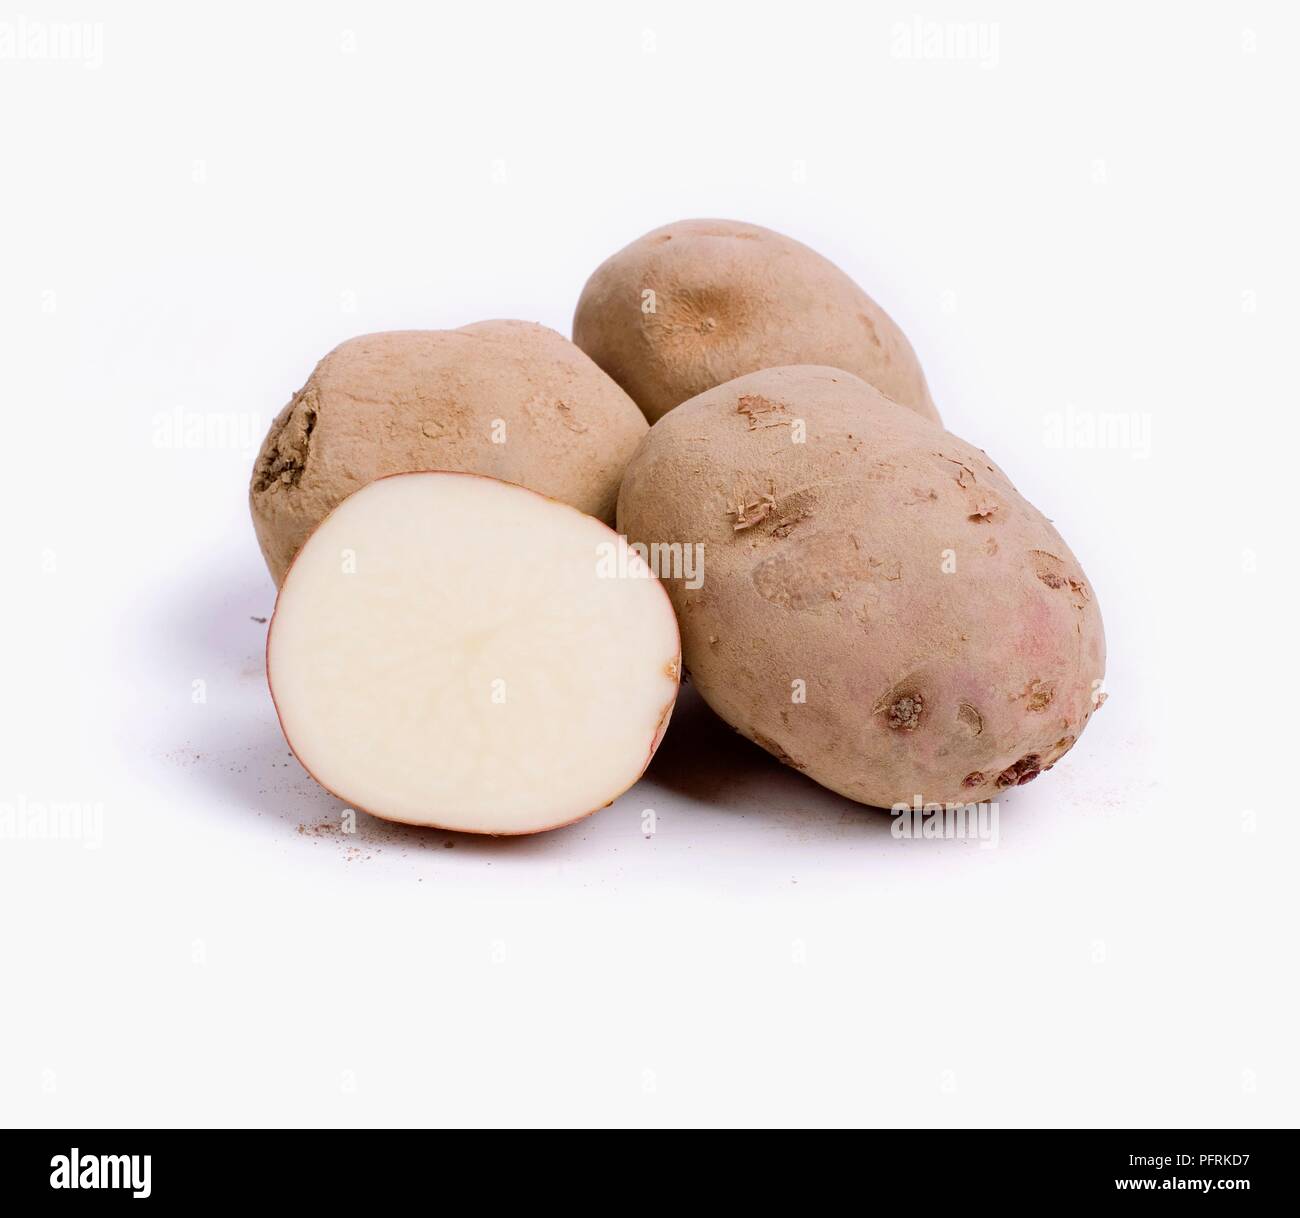 Whole and halved Red Lasoda potatoes with soil on skins Stock Photo